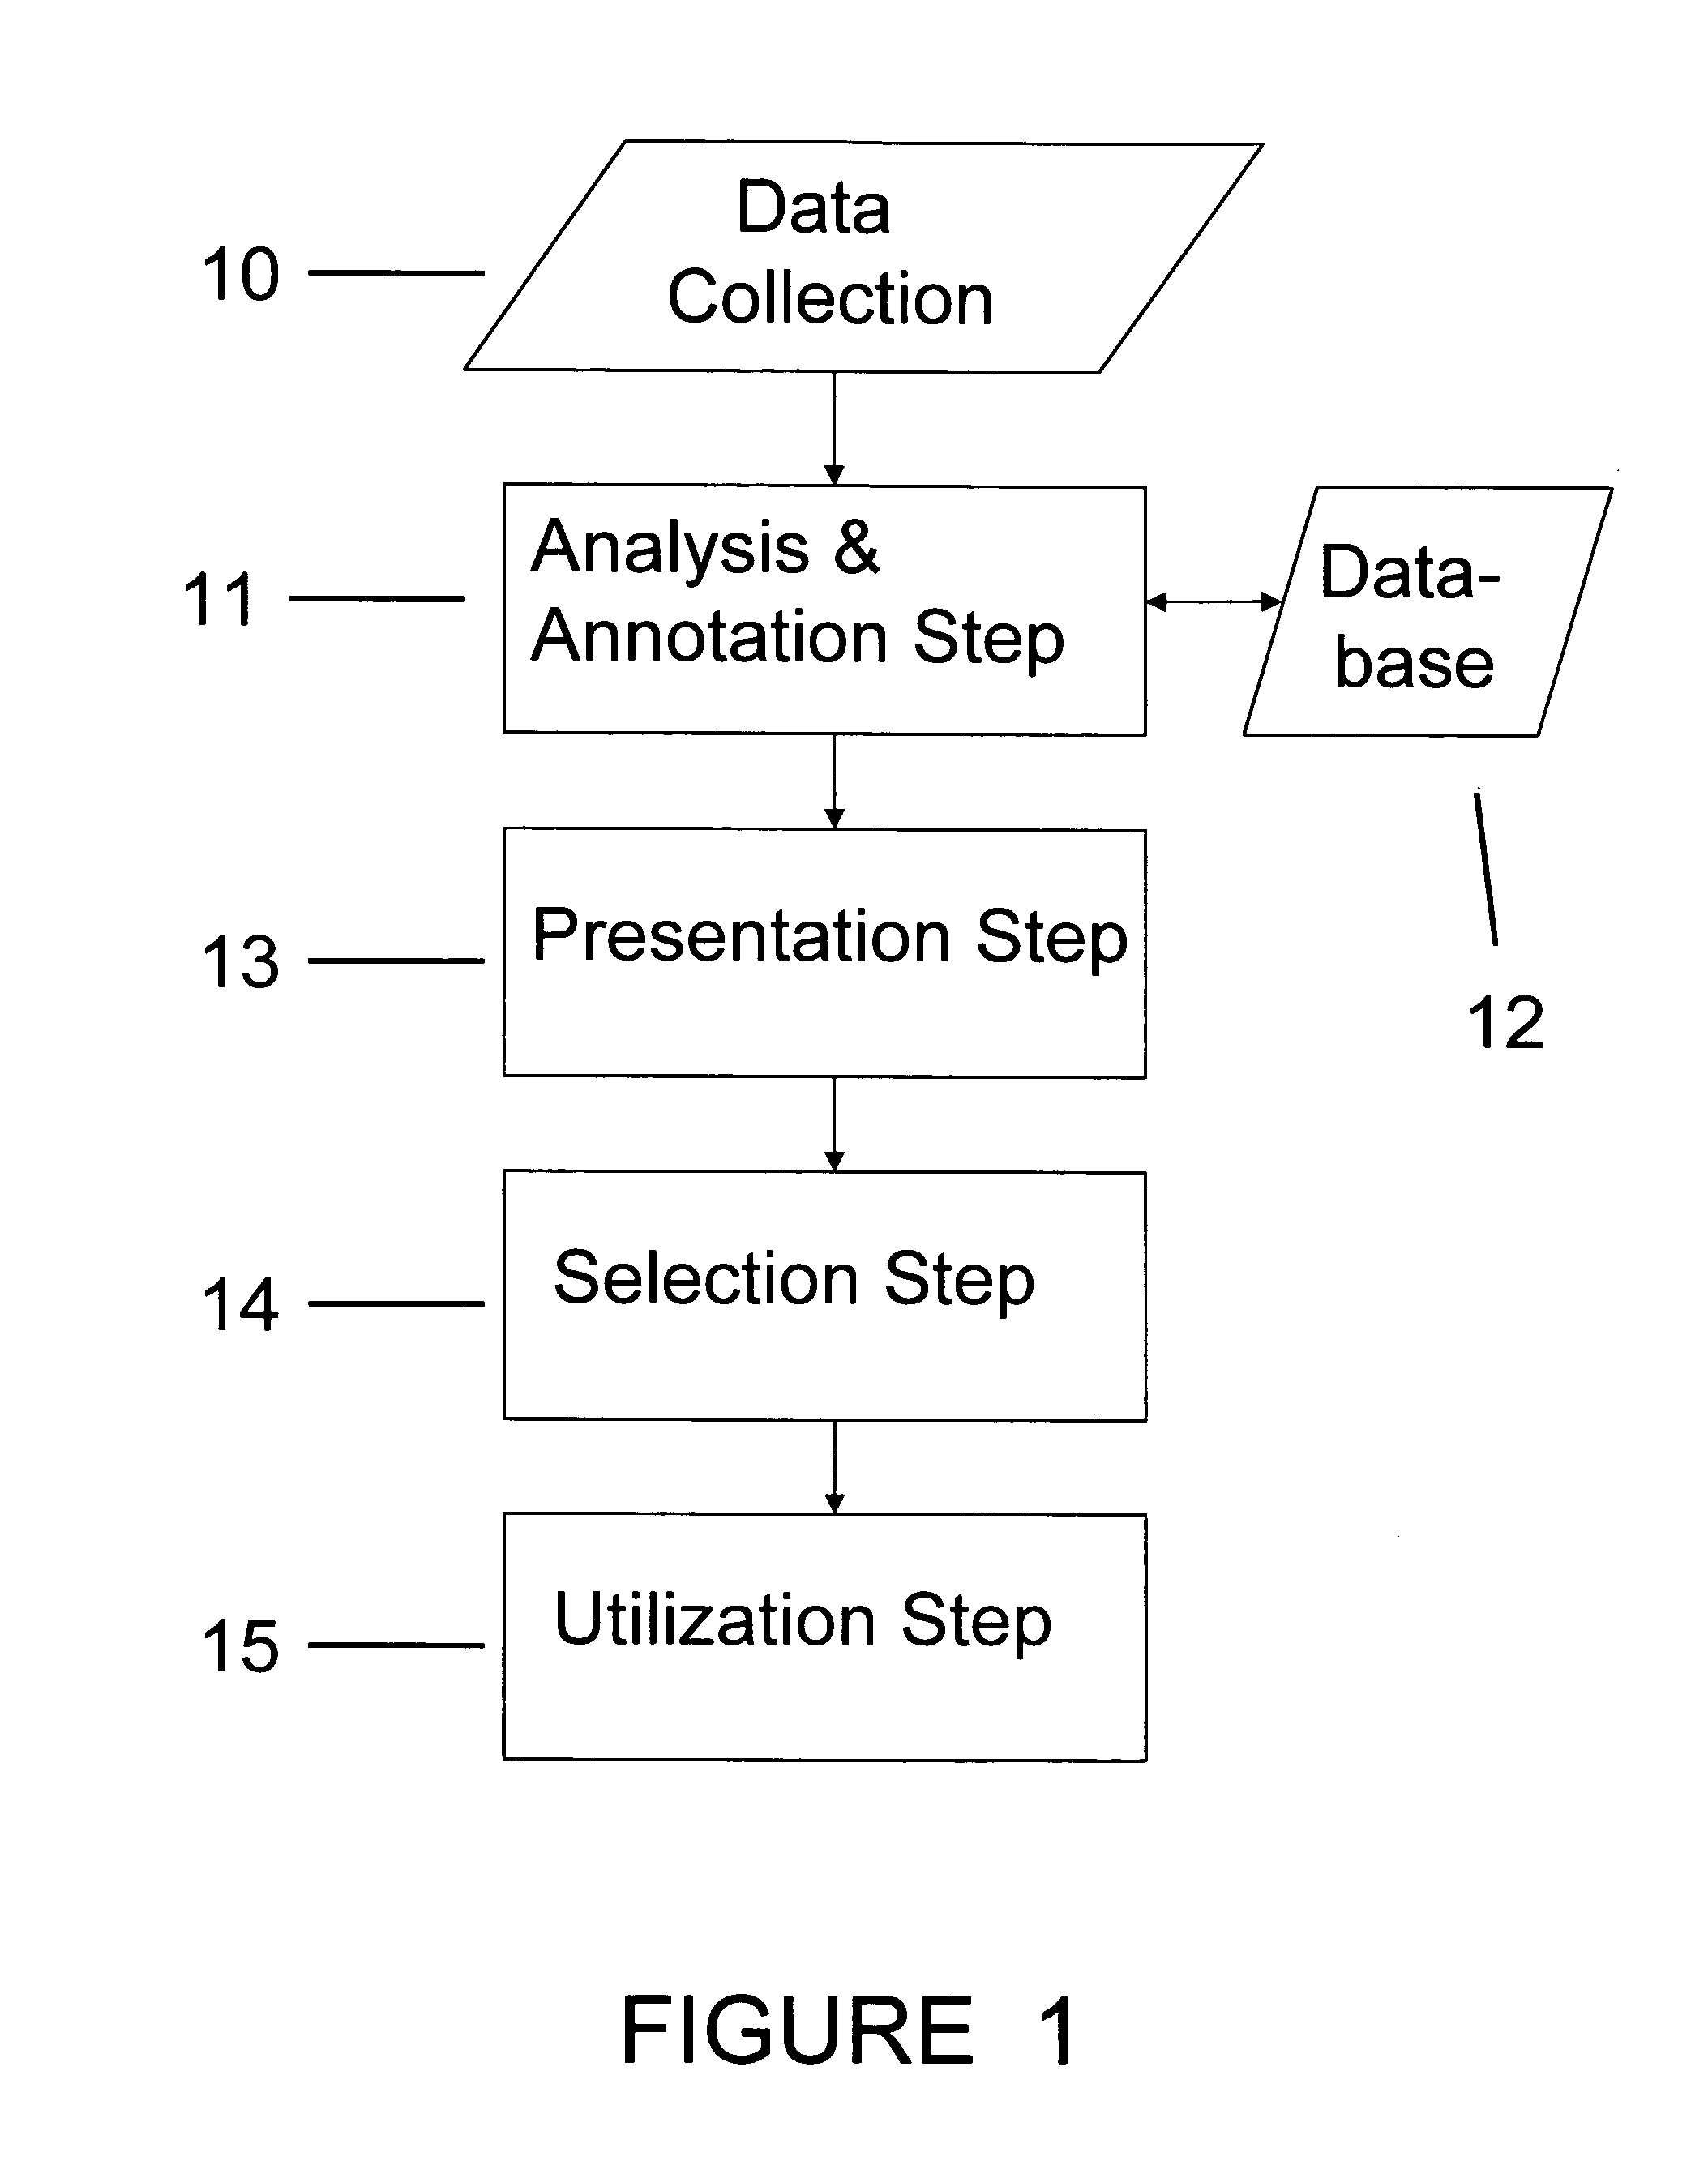 Process for automatic data annotation, selection, and utilization